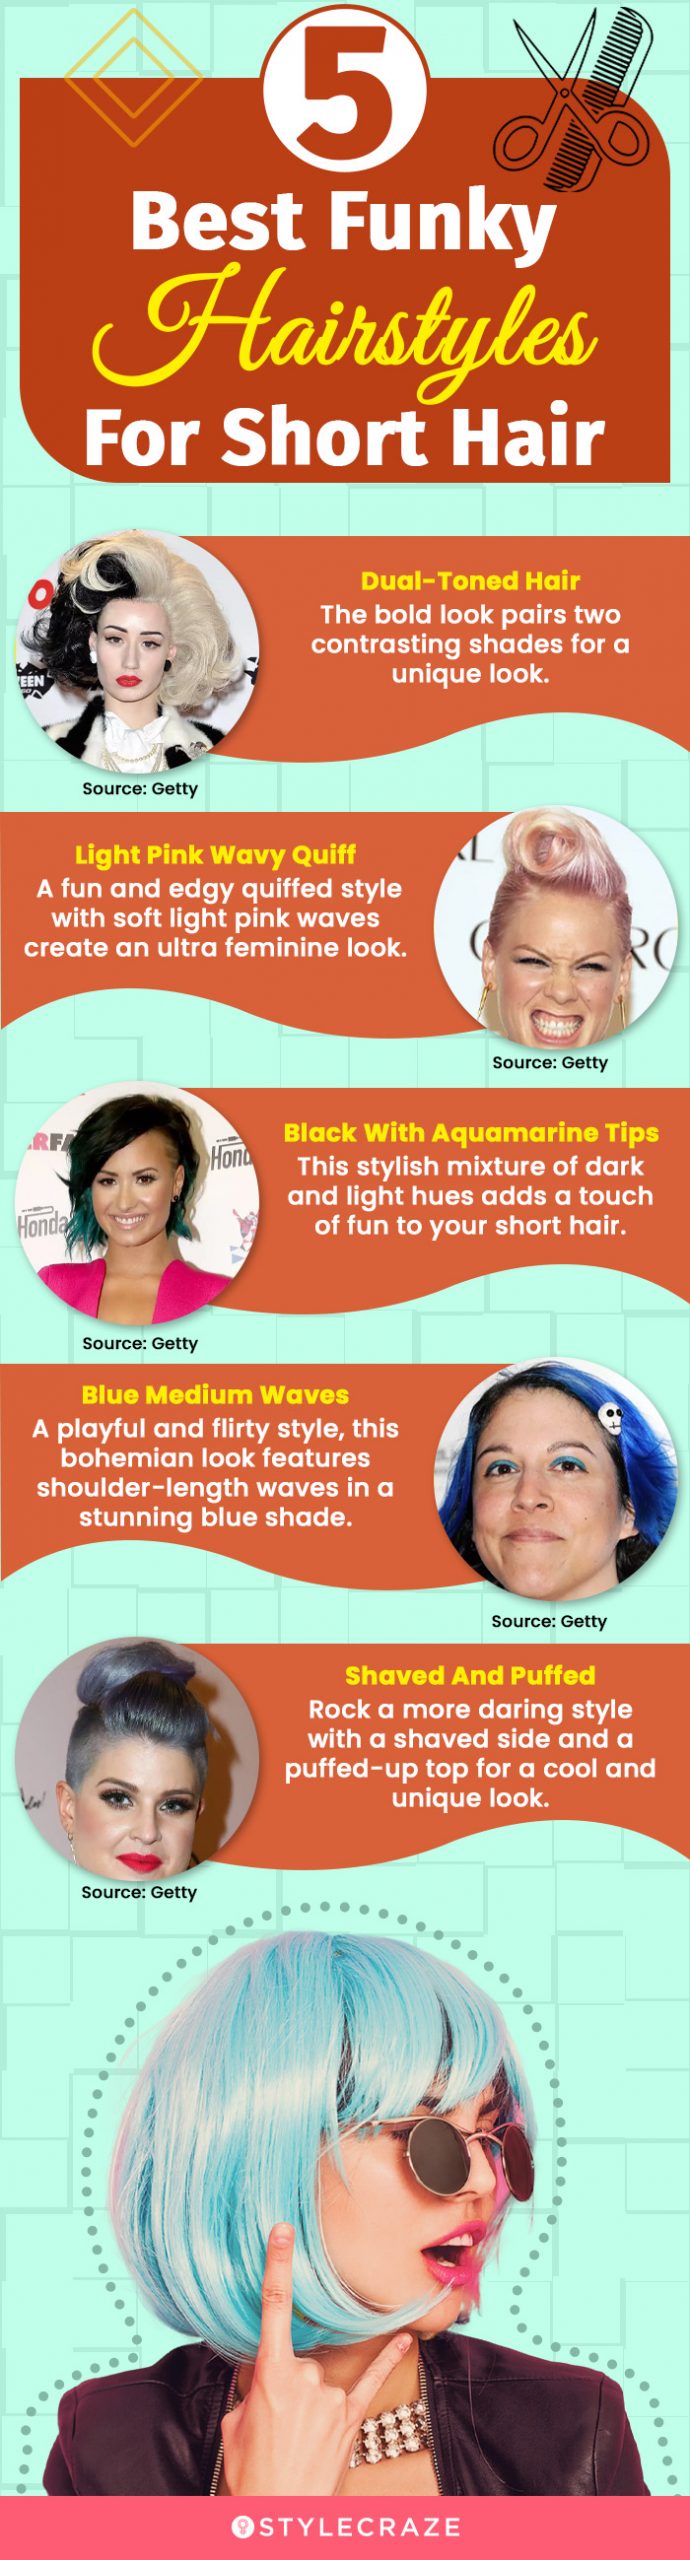 5 best funky hairstyles for short hair [infographic]